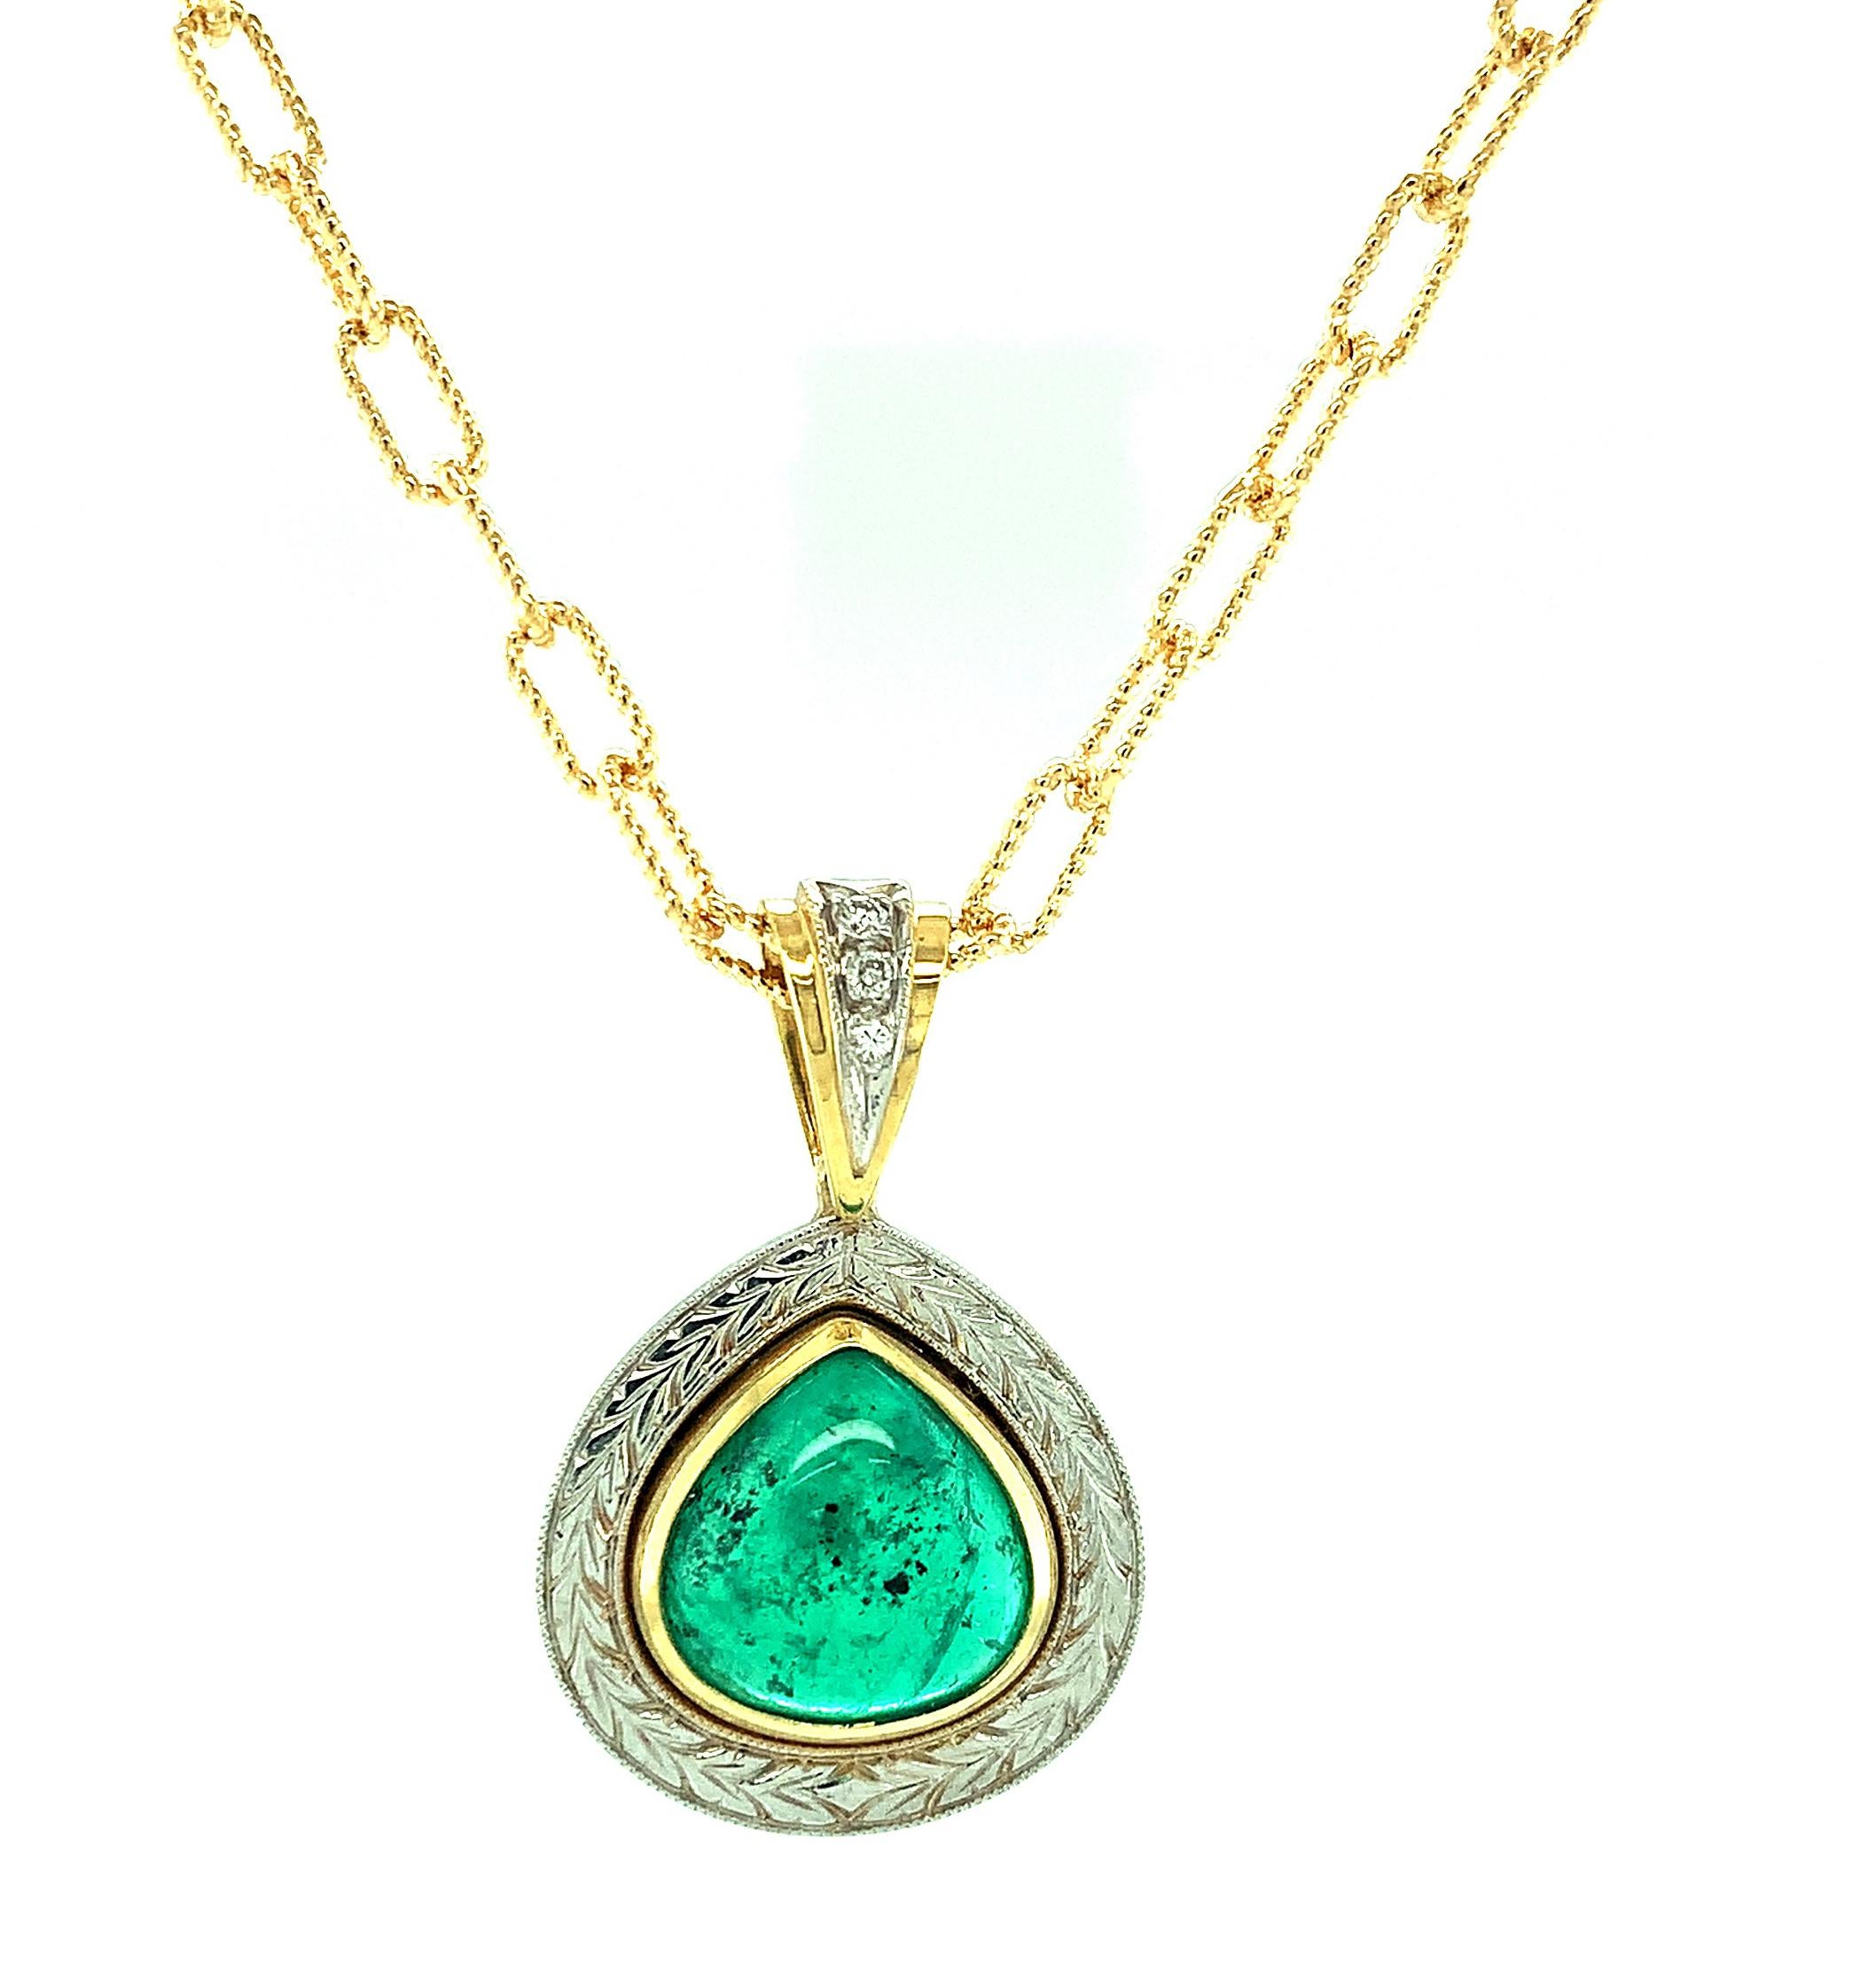 This gorgeous 18k yellow and white gold pendant features an emerald that conjures up images of the  “Emerald City” in The Wizard of Oz!  Cut en-cabochon, it looks like a piece of crystalline candy! This luscious emerald is set in a beautiful,